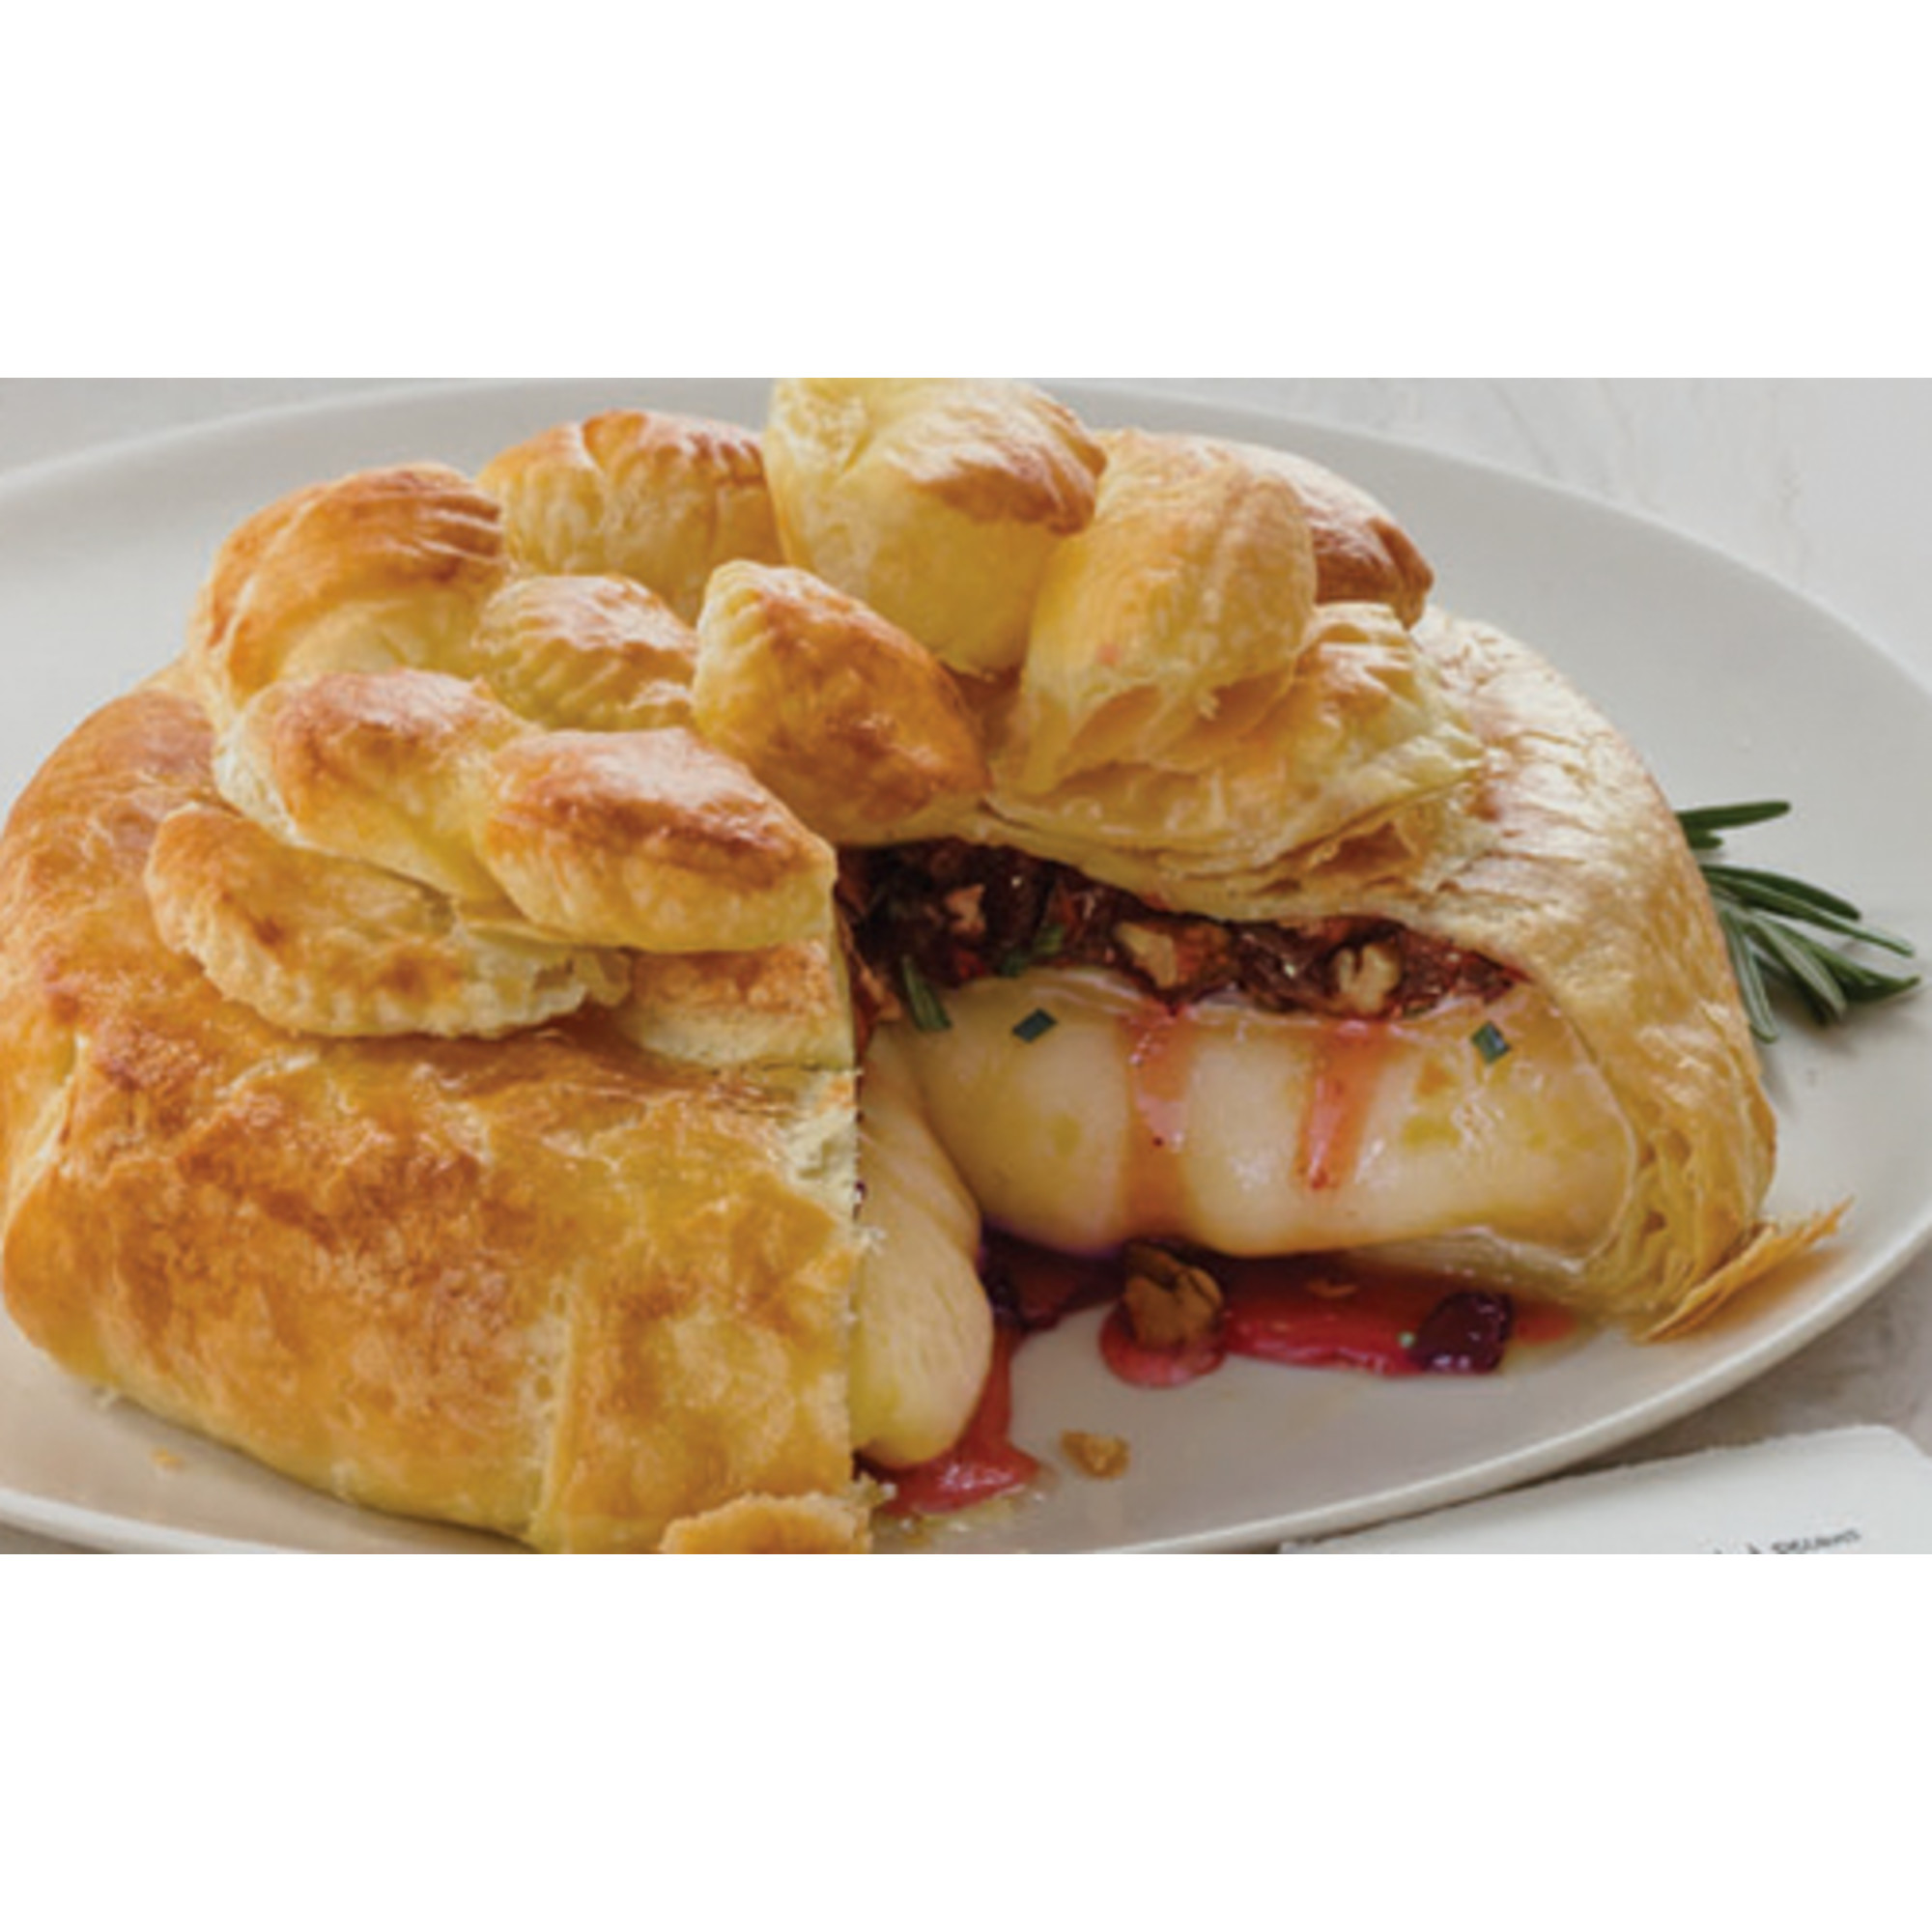 Pepperidge Farm Puff Pastry Frozen Pastry Dough Sheets, 2-Count, 17.3 oz. Box - image 3 of 8